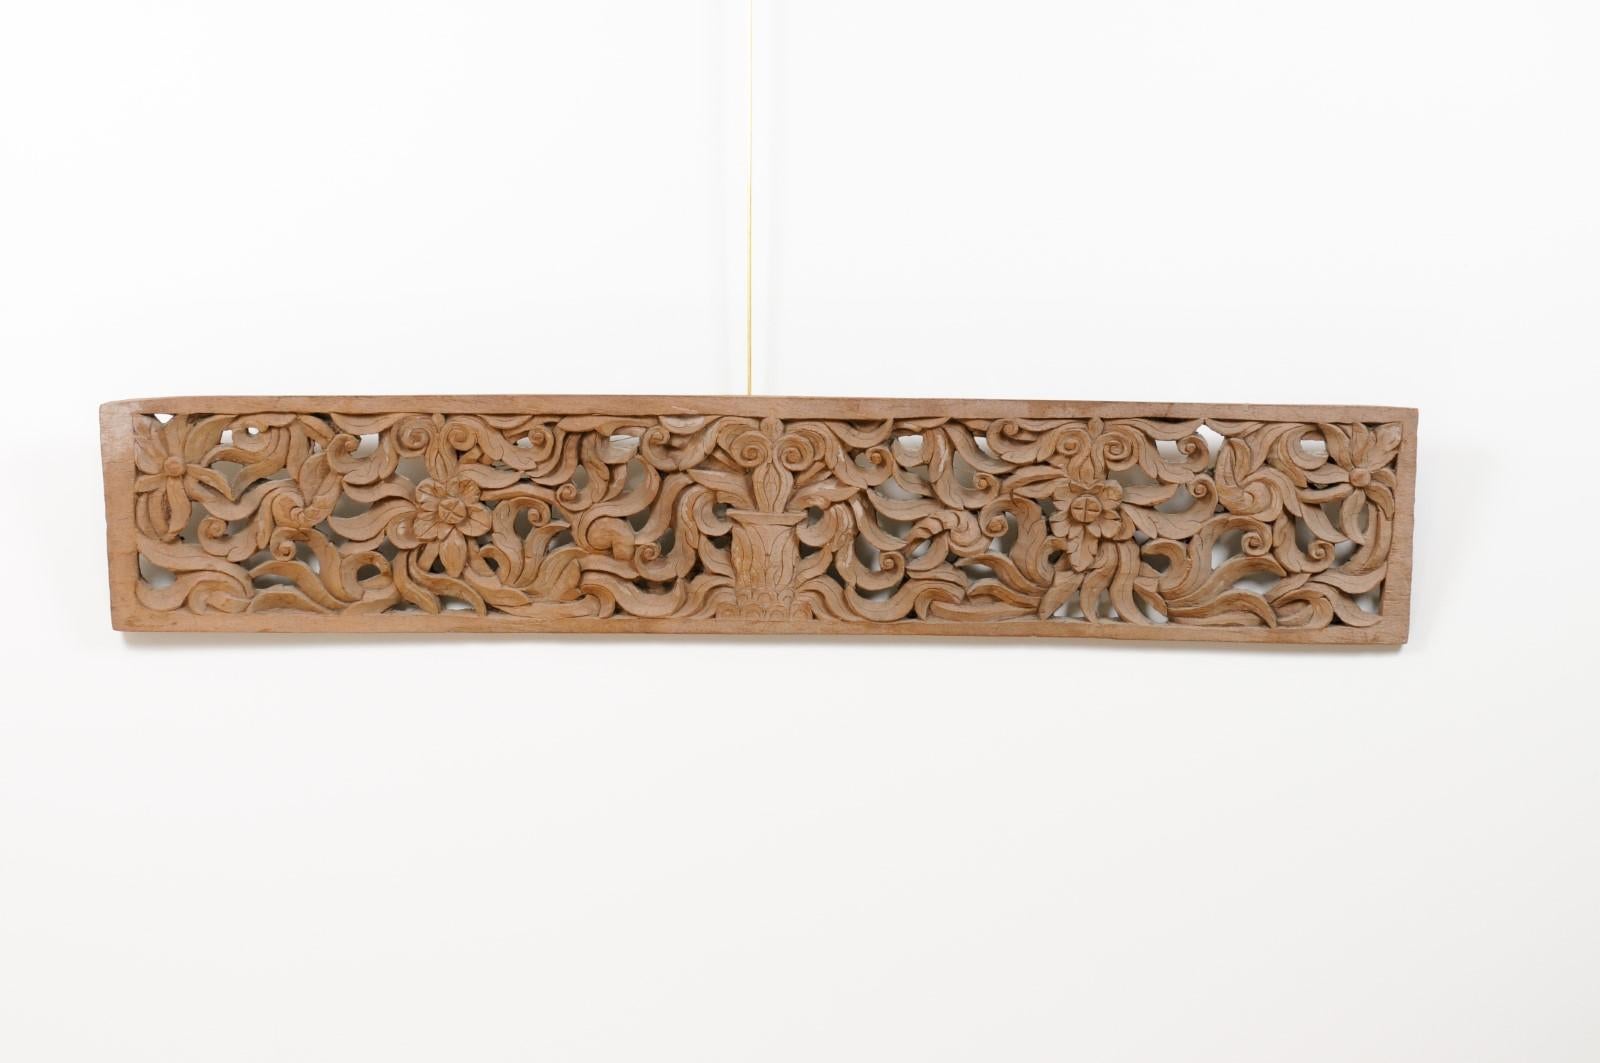 19th Century Asian Architectural transom panel with pierced carved foliage.